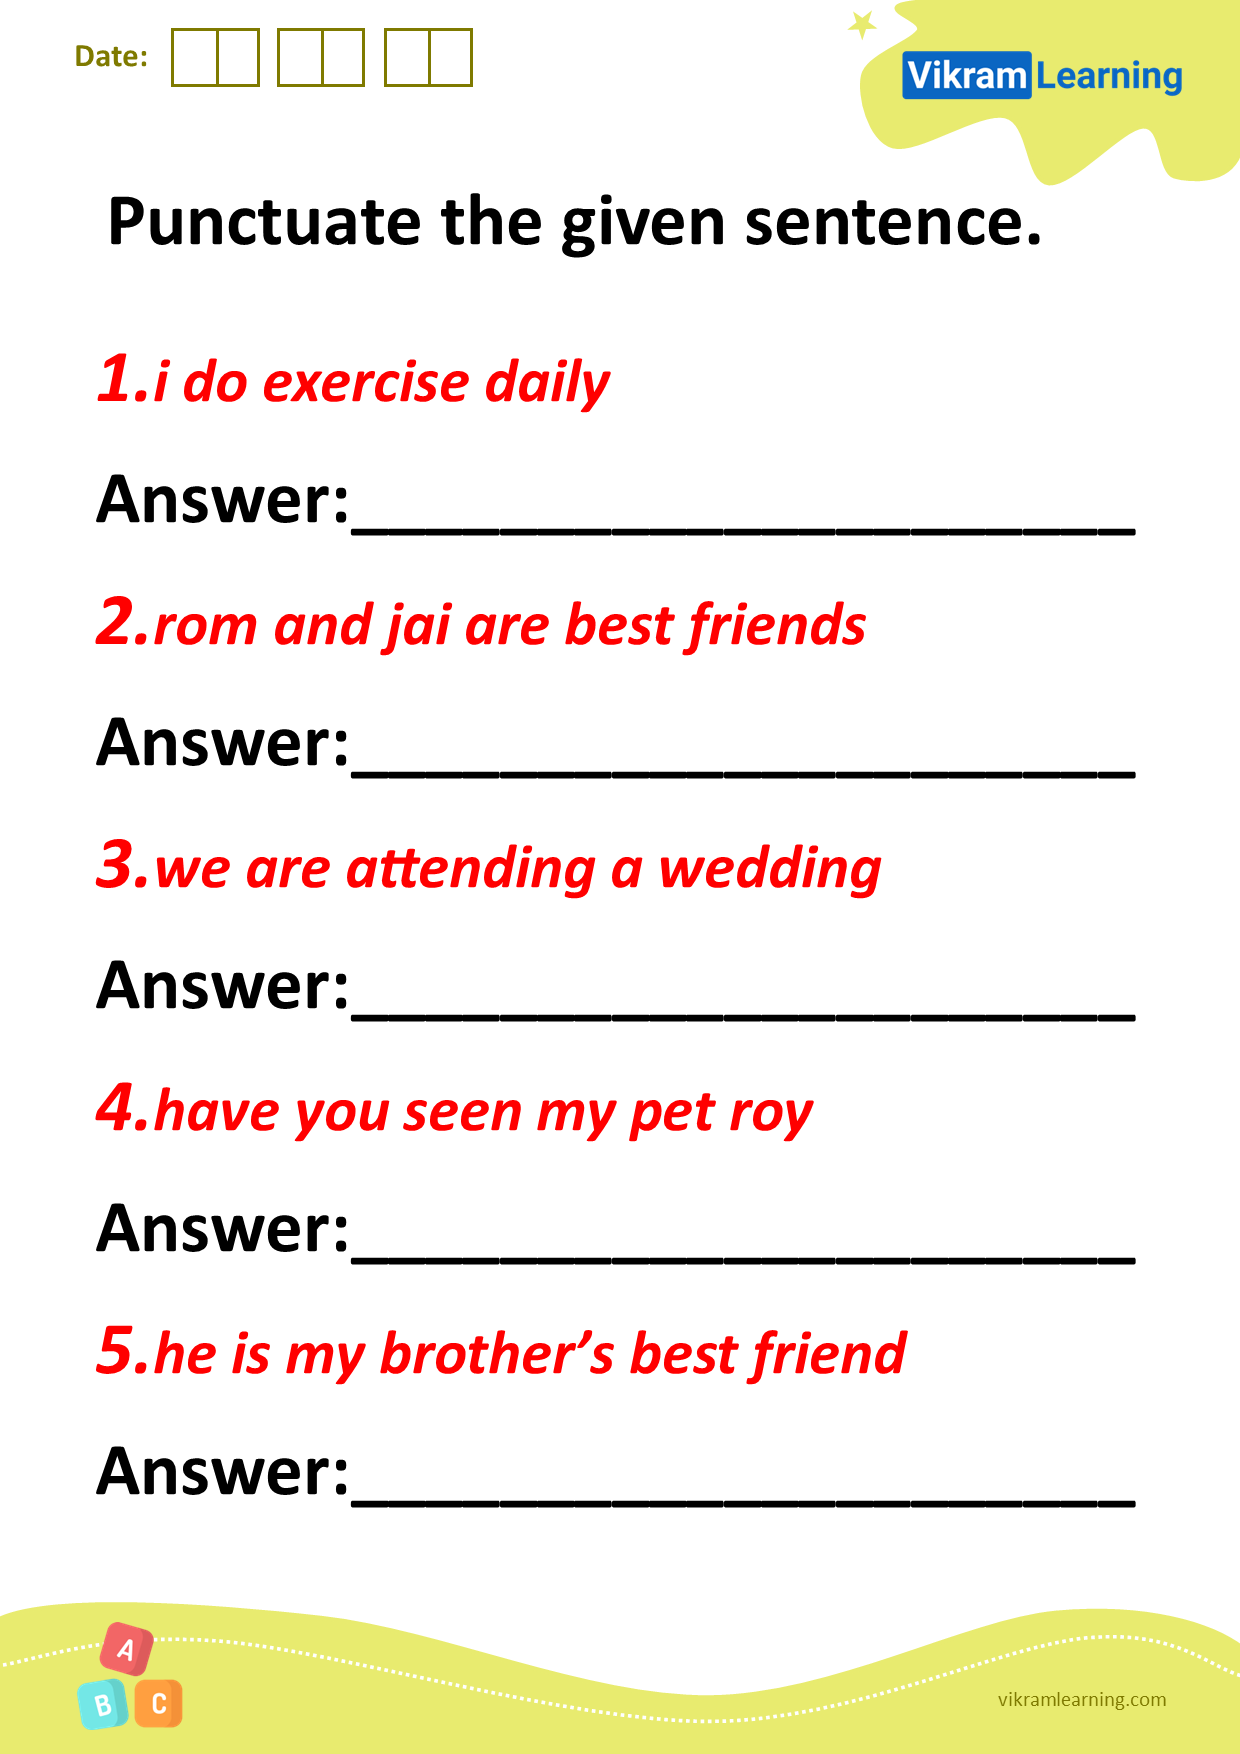 download-statements-questions-orders-and-requests-worksheets-for-free